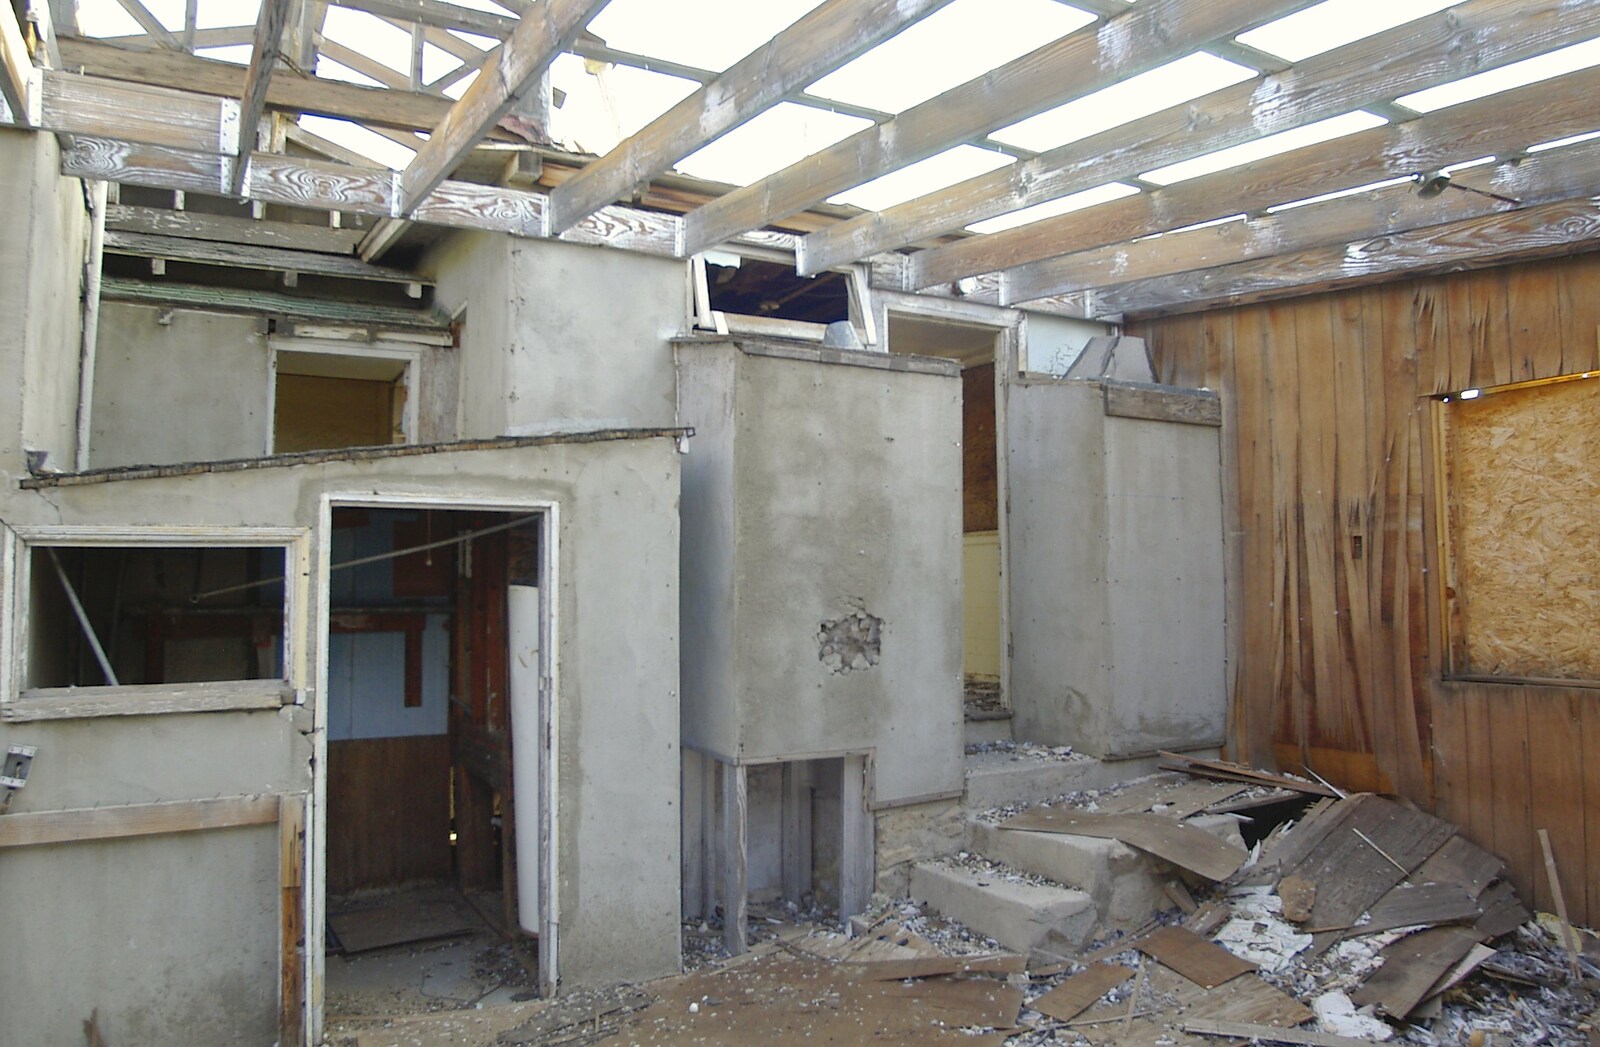 Dereliction from Mojave Desert: San Diego to Joshua Tree and Twentynine Palms, California, US - 5th March 2006